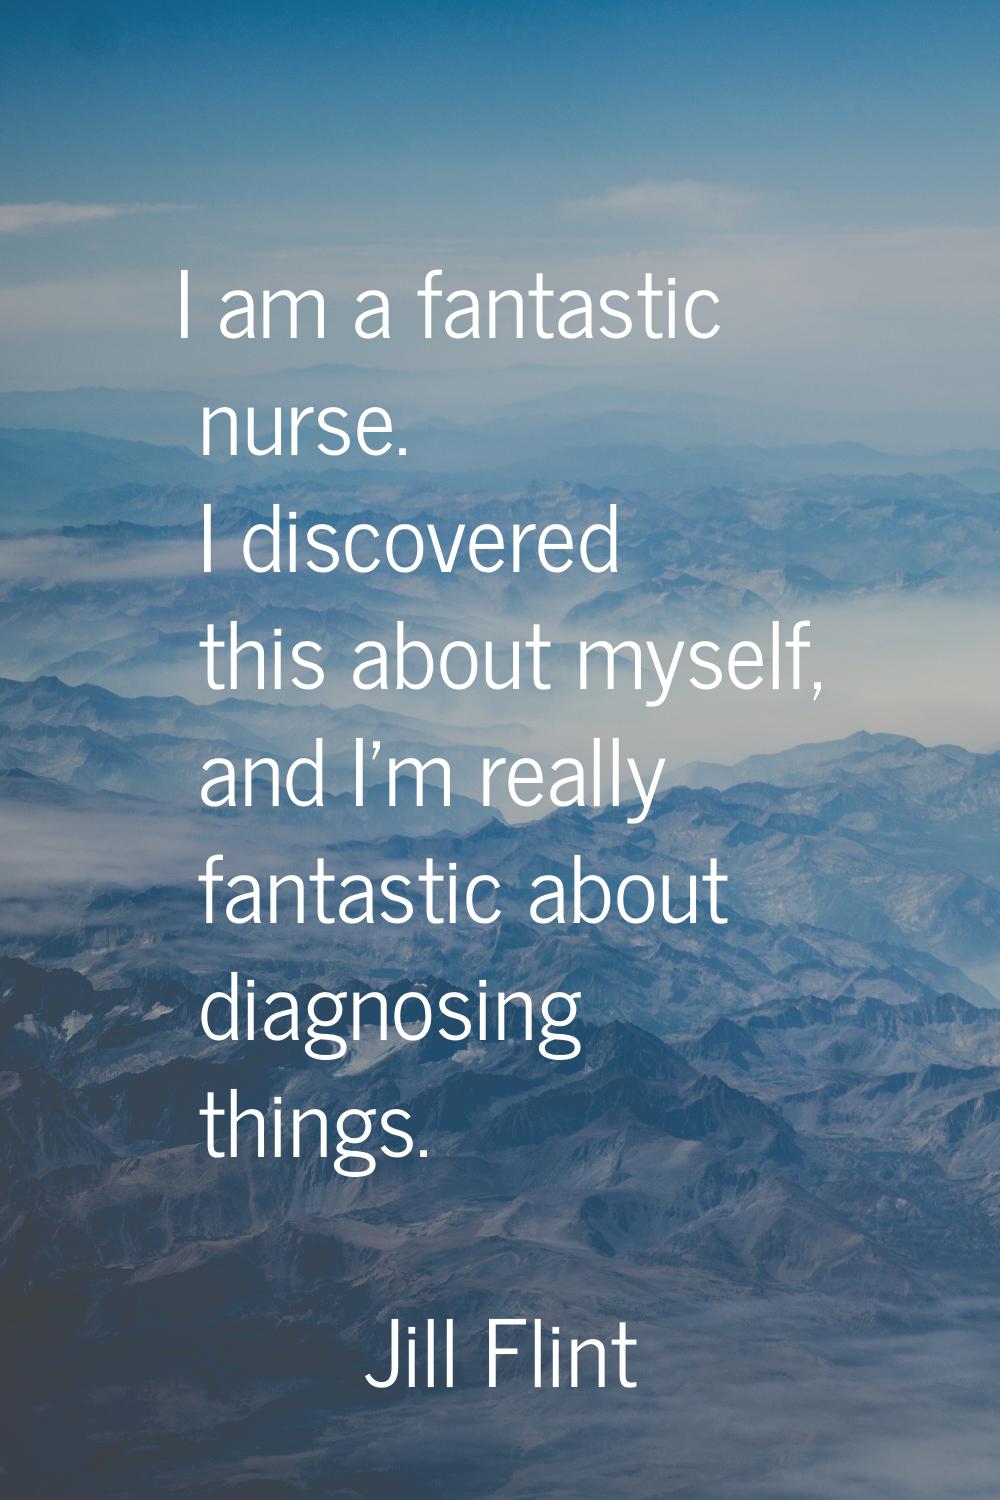 I am a fantastic nurse. I discovered this about myself, and I'm really fantastic about diagnosing t